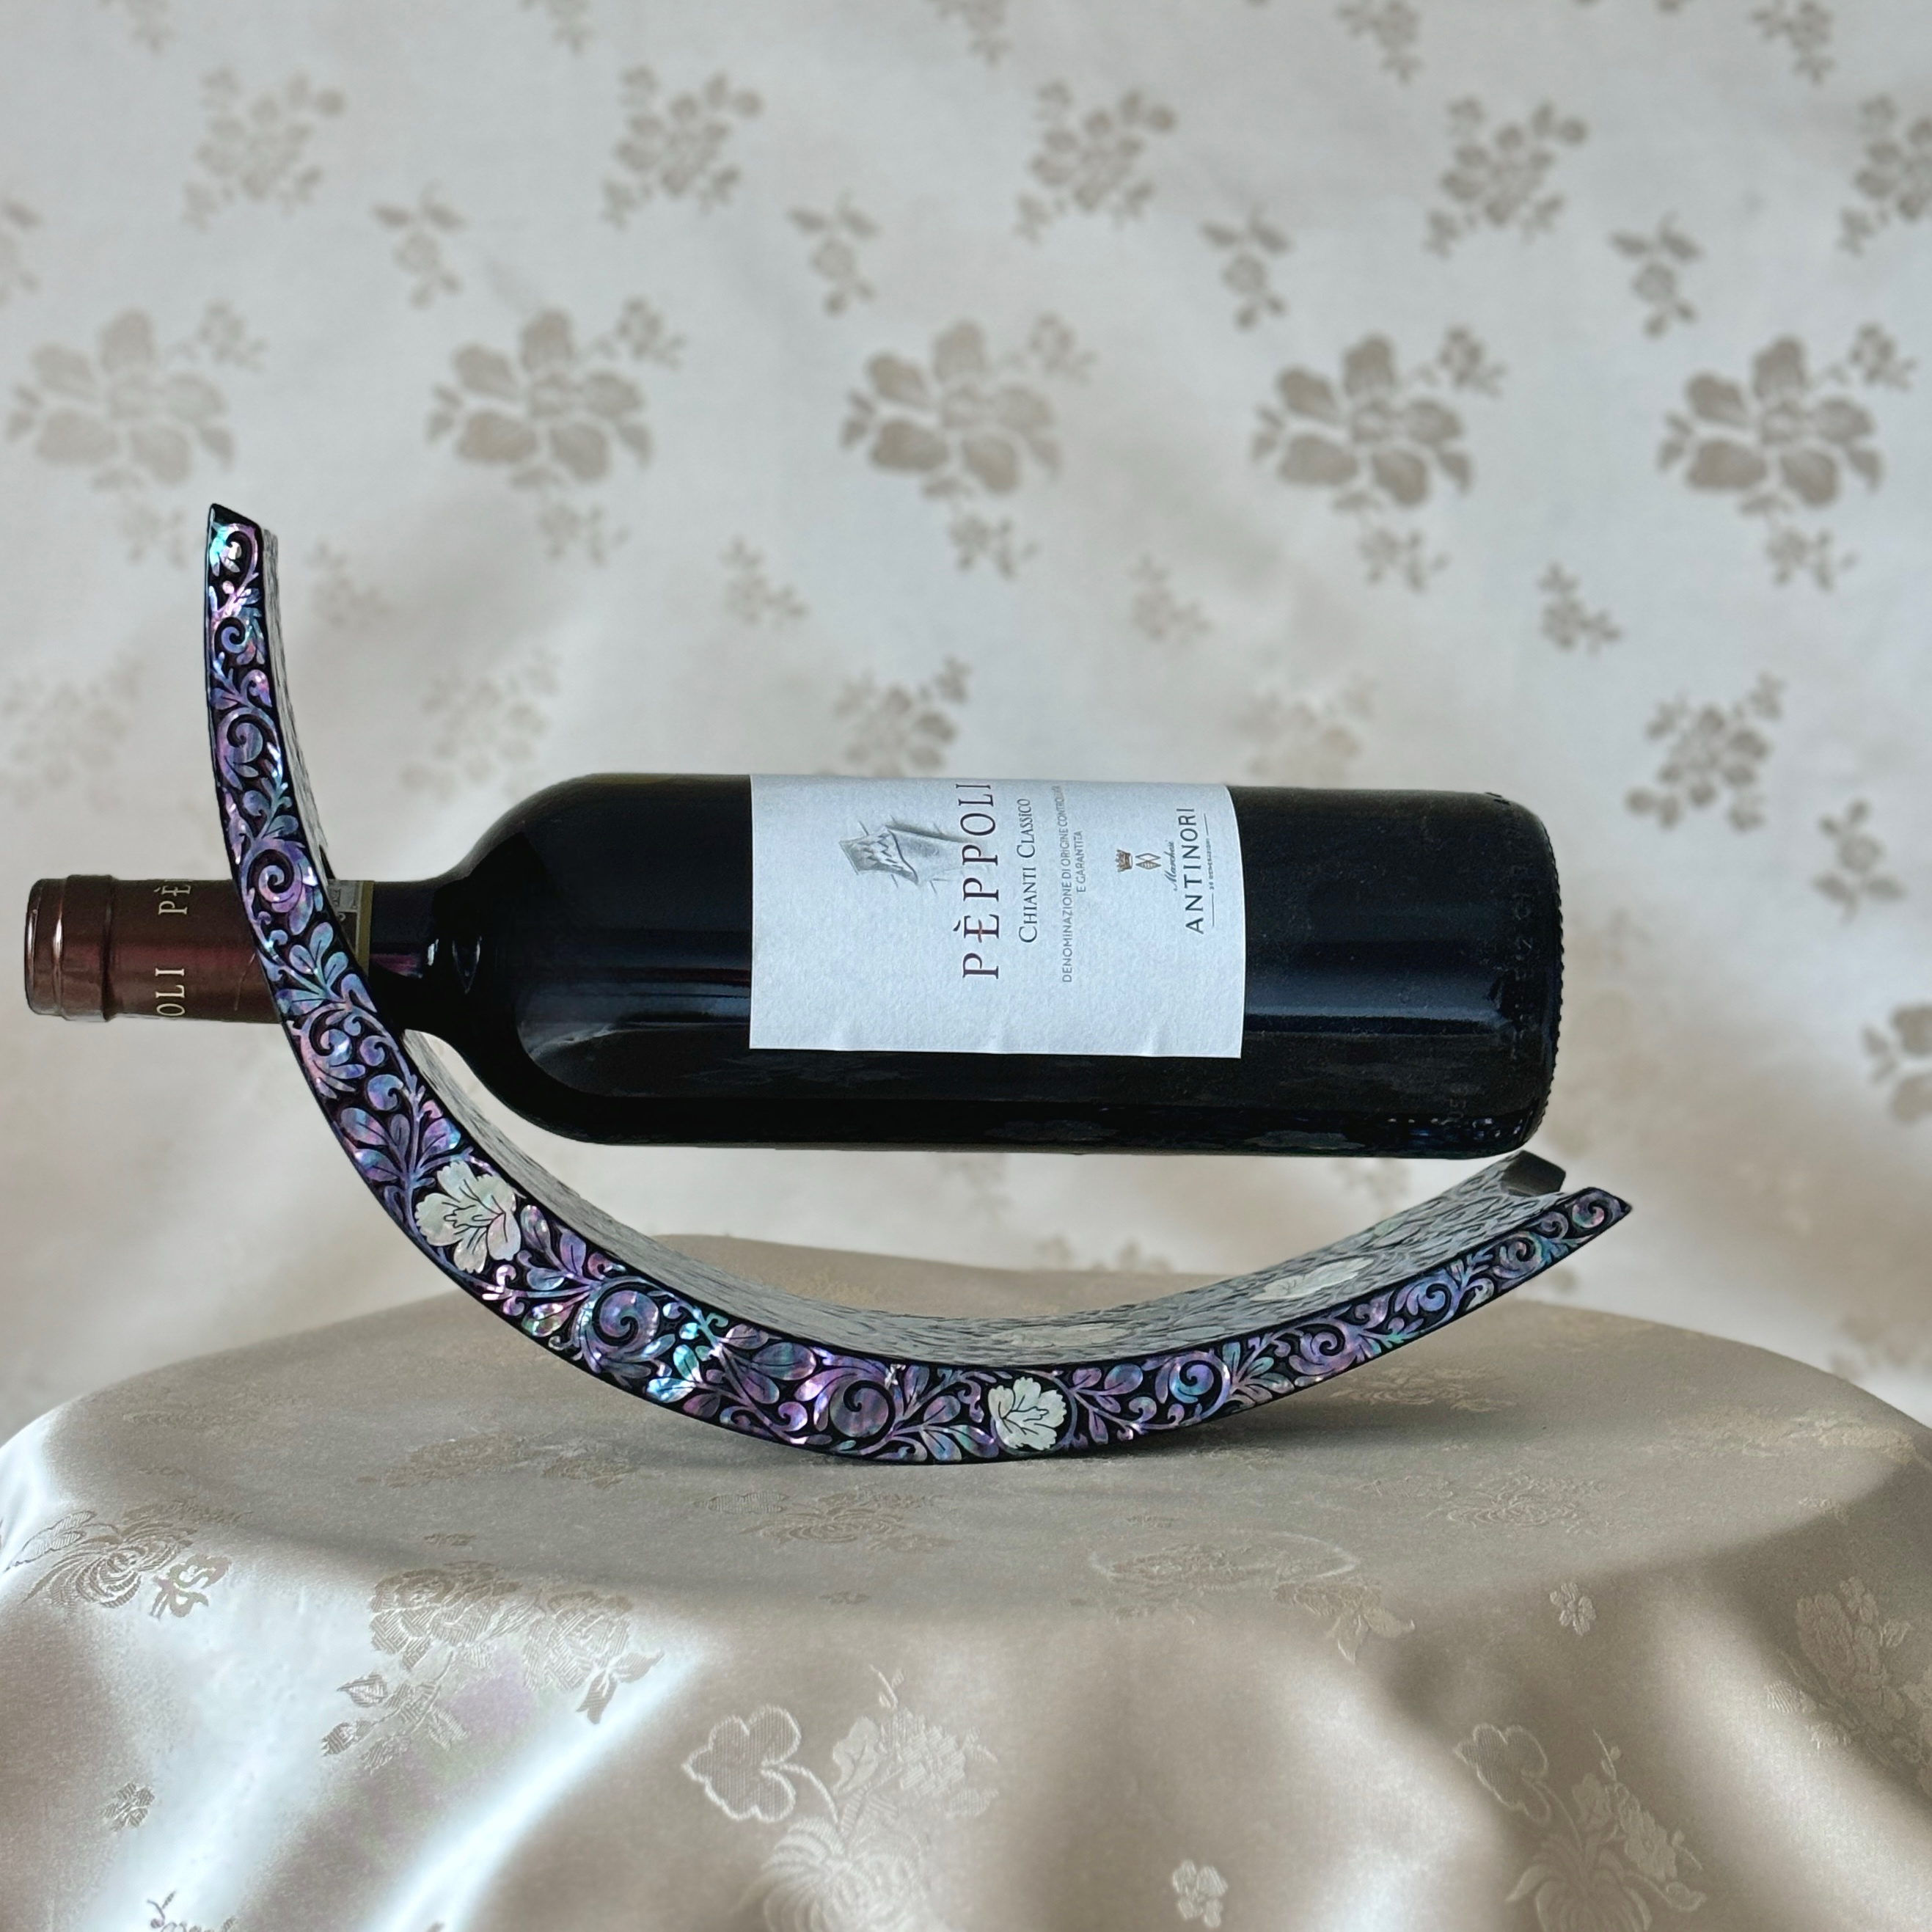 Korean mother of pearl wine holder with a wine bottle placed in the holder, demonstrating how to use it.